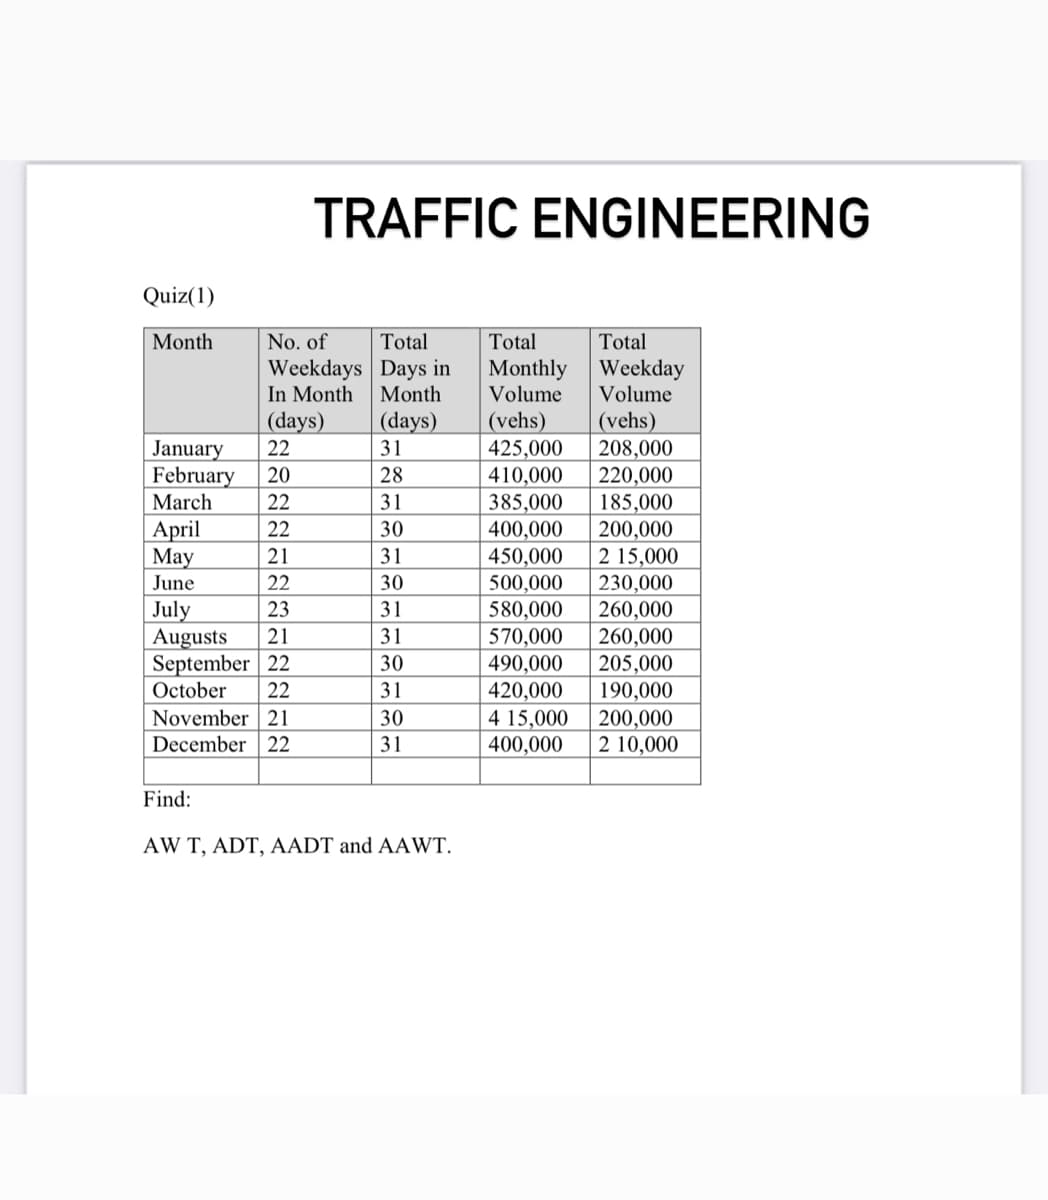 TRAFFIC ENGINEERING
Quiz(1)
Month
No. of
Total
Total
Total
Weekdays Days in
Monthly Weekday
Volume
Volume
In Month
Month
(vehs)
425,000
410,000
385,000
400,000
450,000
500,000
(vehs)
208,000
220,000
185,000
200,000
2 15,000
230,000
260,000
260,000
205,000
190,000
(days)
(days)
January
February
22
31
20
28
March
22
31
April
Мay
22
30
21
31
June
22
30
July
Augusts
September 22
October
23
31
580,000
570,000
490,000
420,000
4 15,000
400,000
21
31
30
22
31
November 21
December | 22
30
200,000
2 10,000
31
Find:
AW T, ADT, AADT and AAWT.
